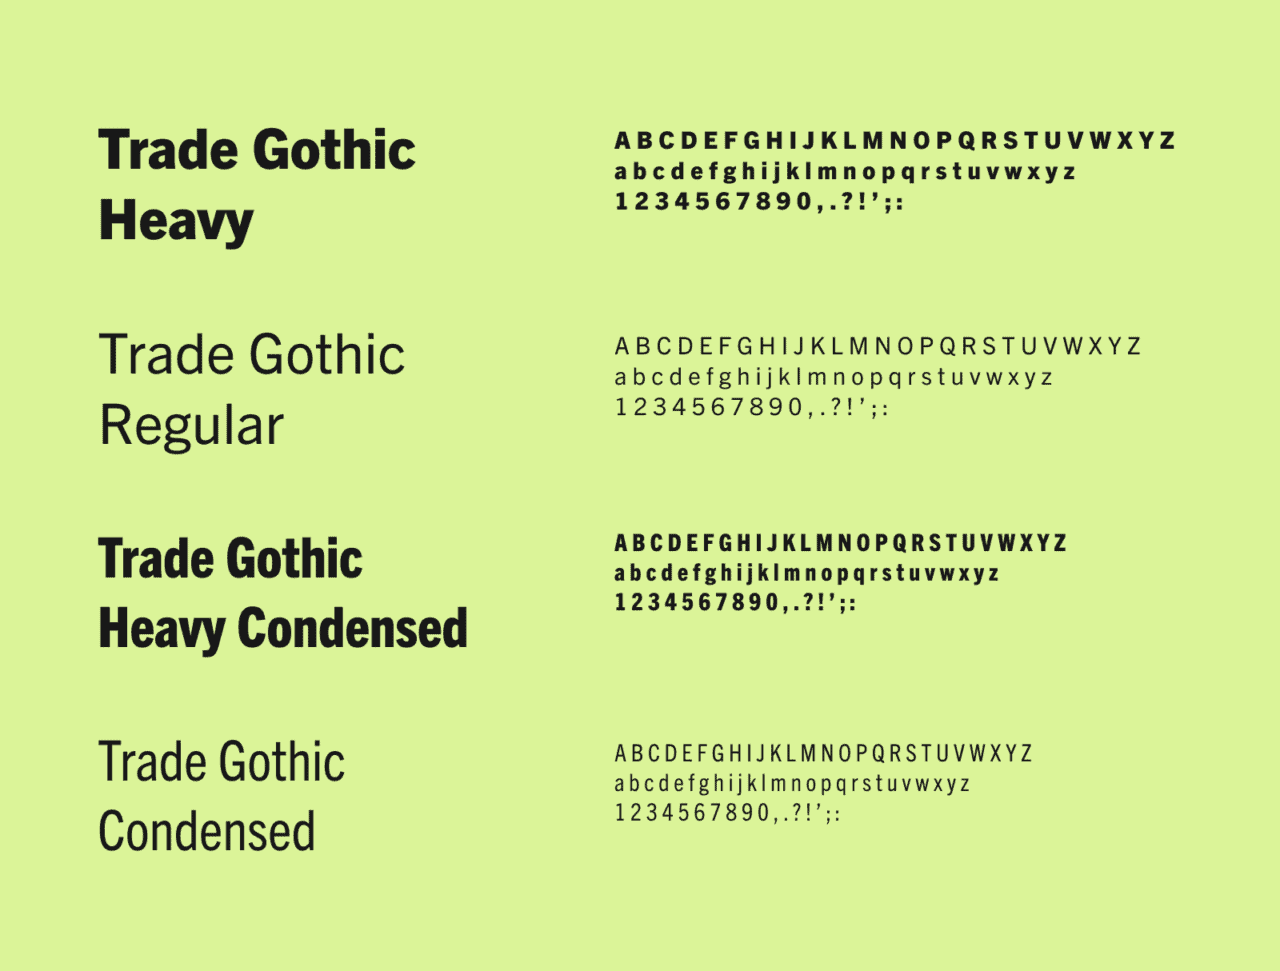 Table showing four variants of Trade Gothic, the font used for Amphibian Stage website